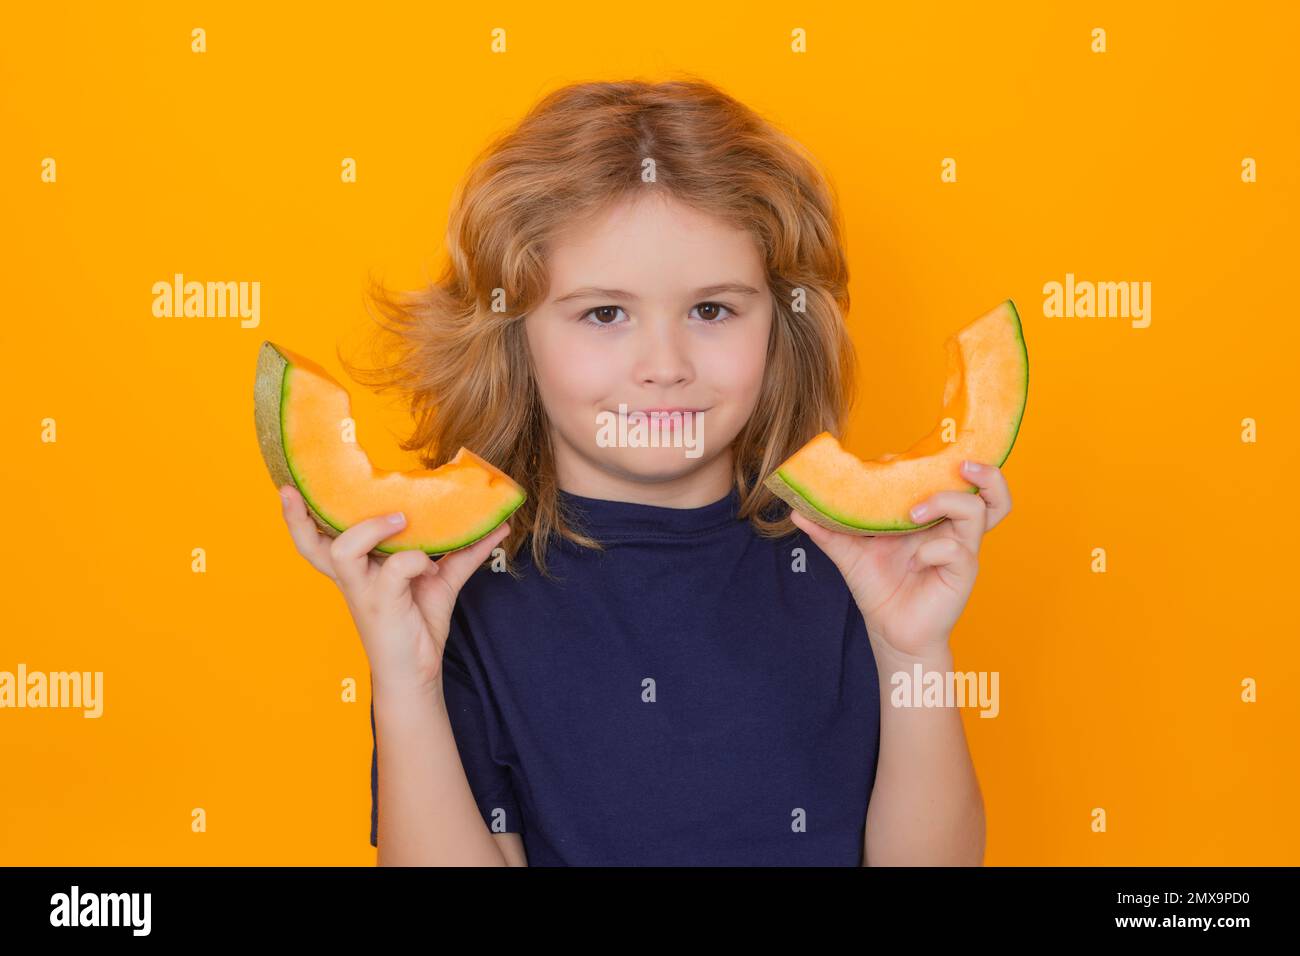 Melon. Child hold red melon in studio. Melon fruit. Studio portrait of cute kid boy with melon isolated on yellow Stock Photo